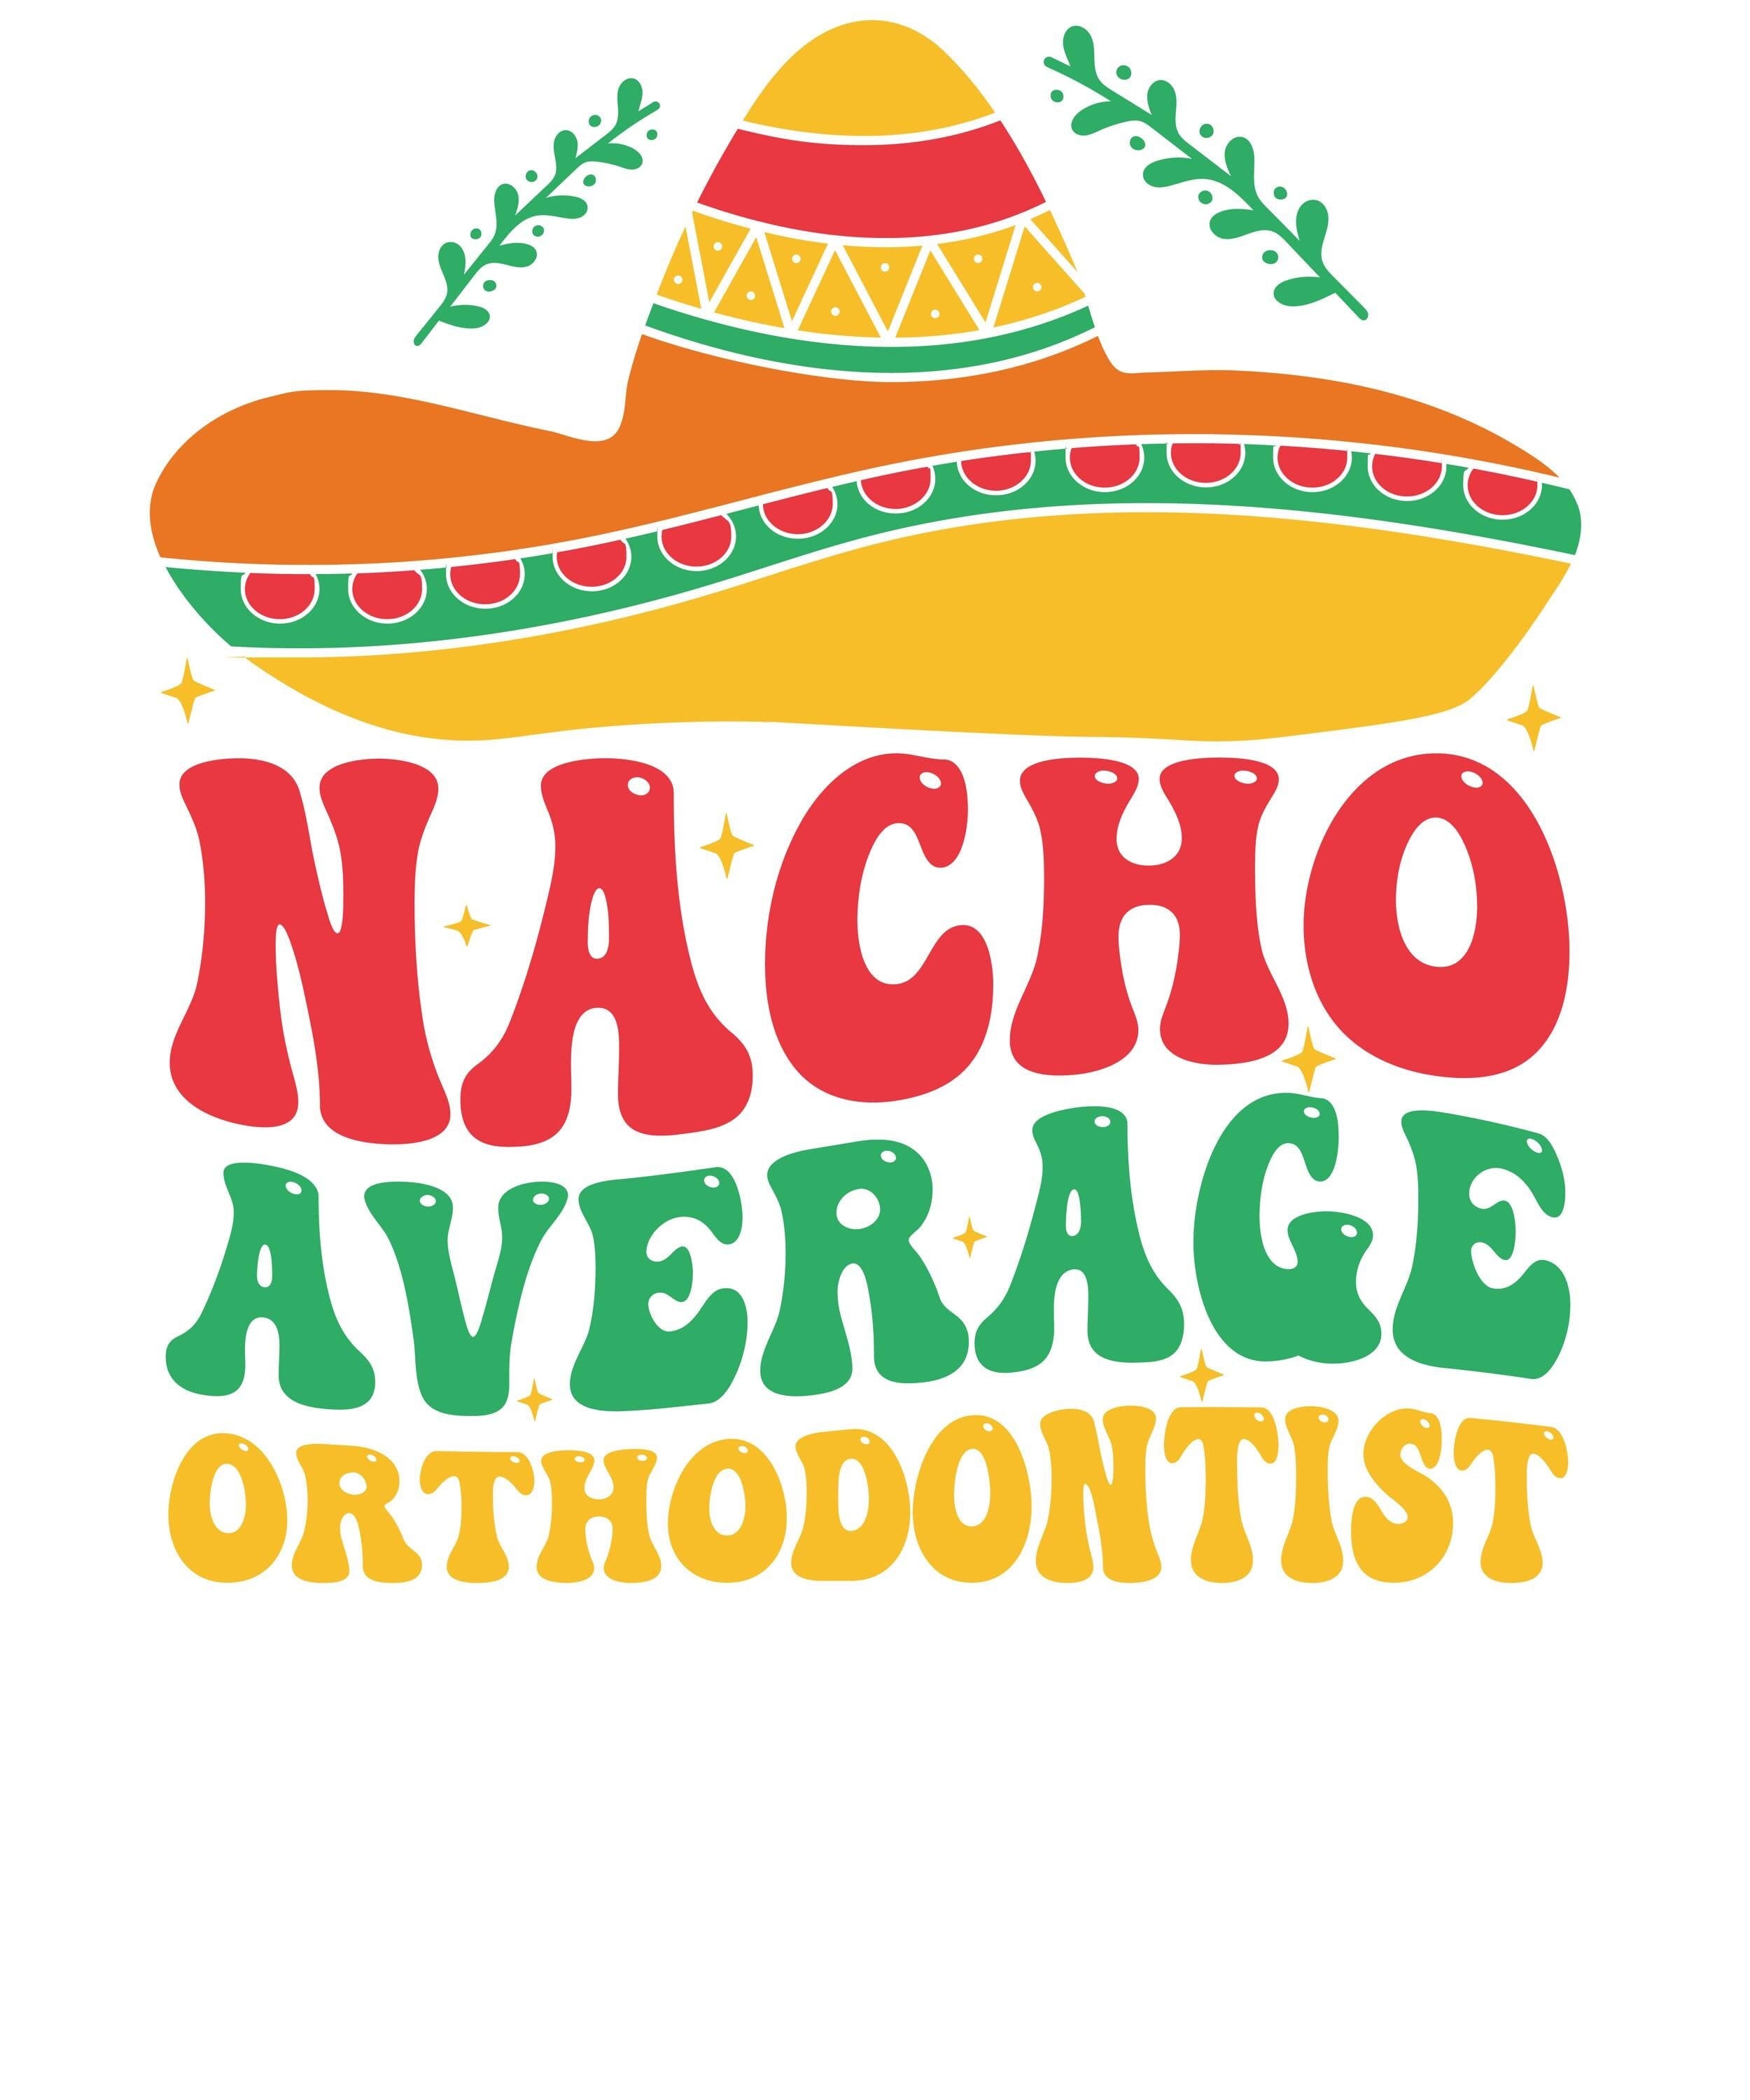 Nacho average orthodontist Svg Png, Nacho Average Mexican  svg png, Cinco de Mayo fiesta  Mexican